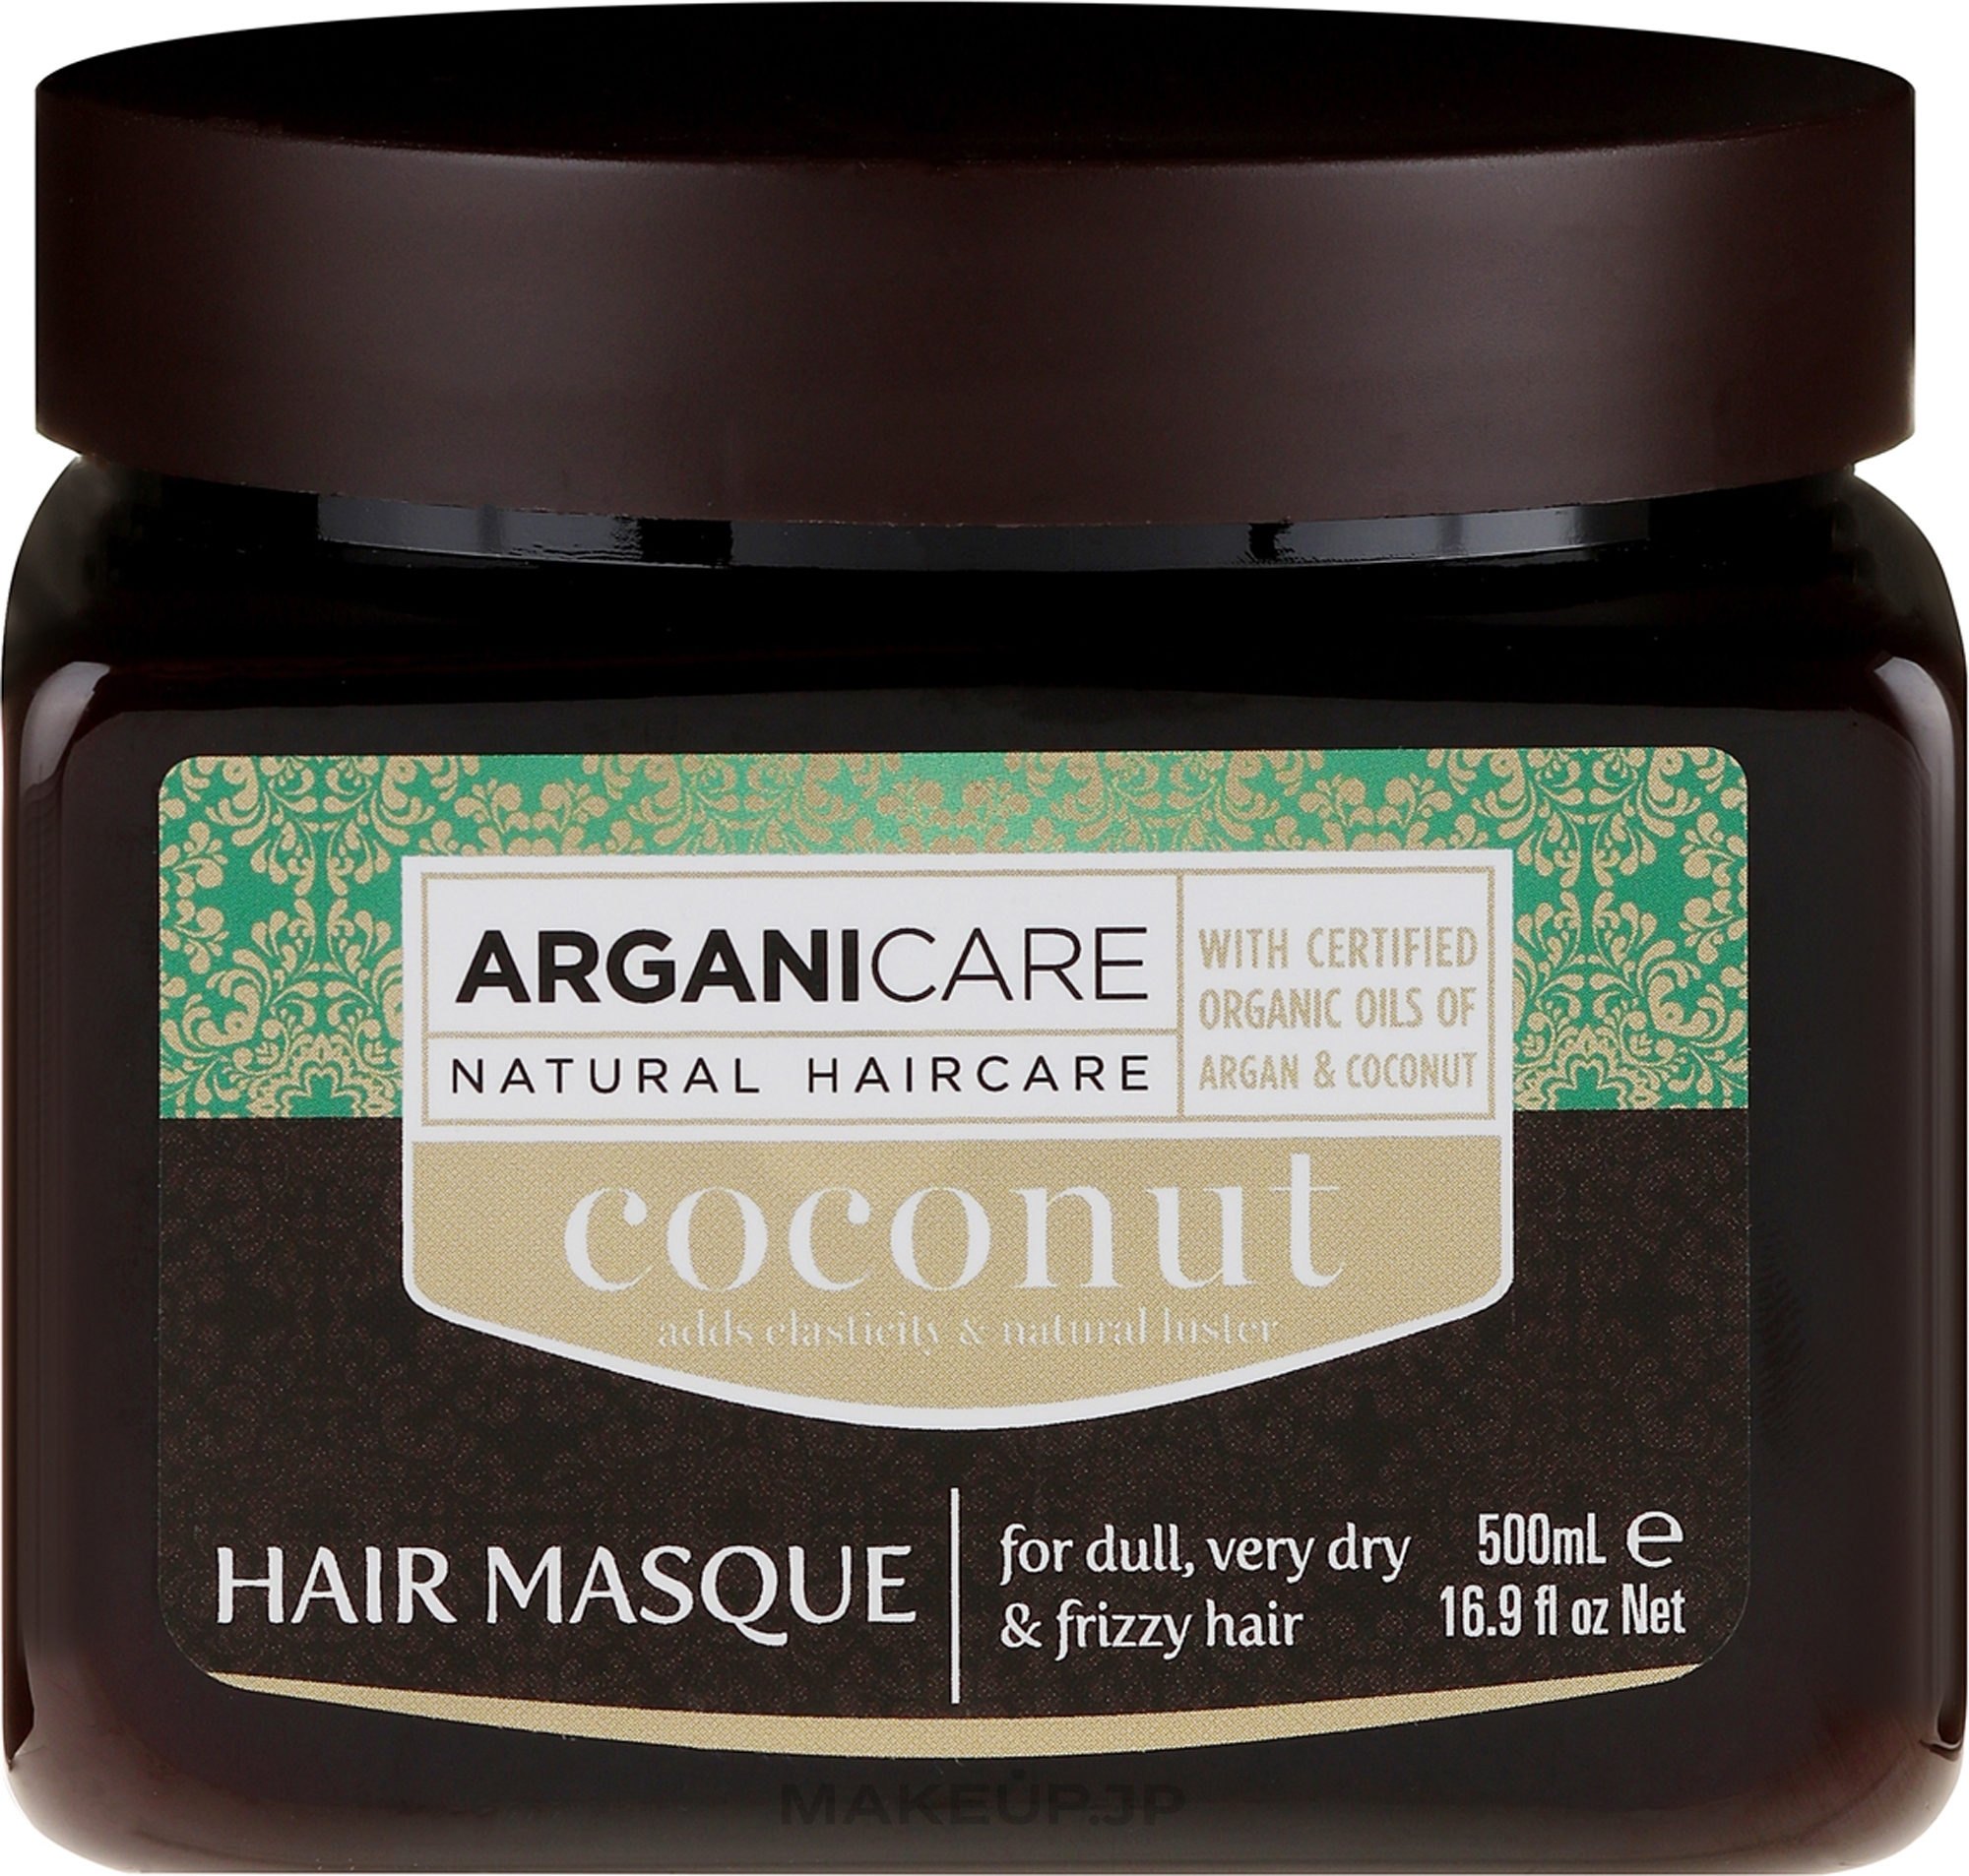 Repair Hair Structure Coconut Oil Mask - Arganicare Coconut Hair Masque For Dull, Very Dry & Frizzy Hair — photo 500 ml